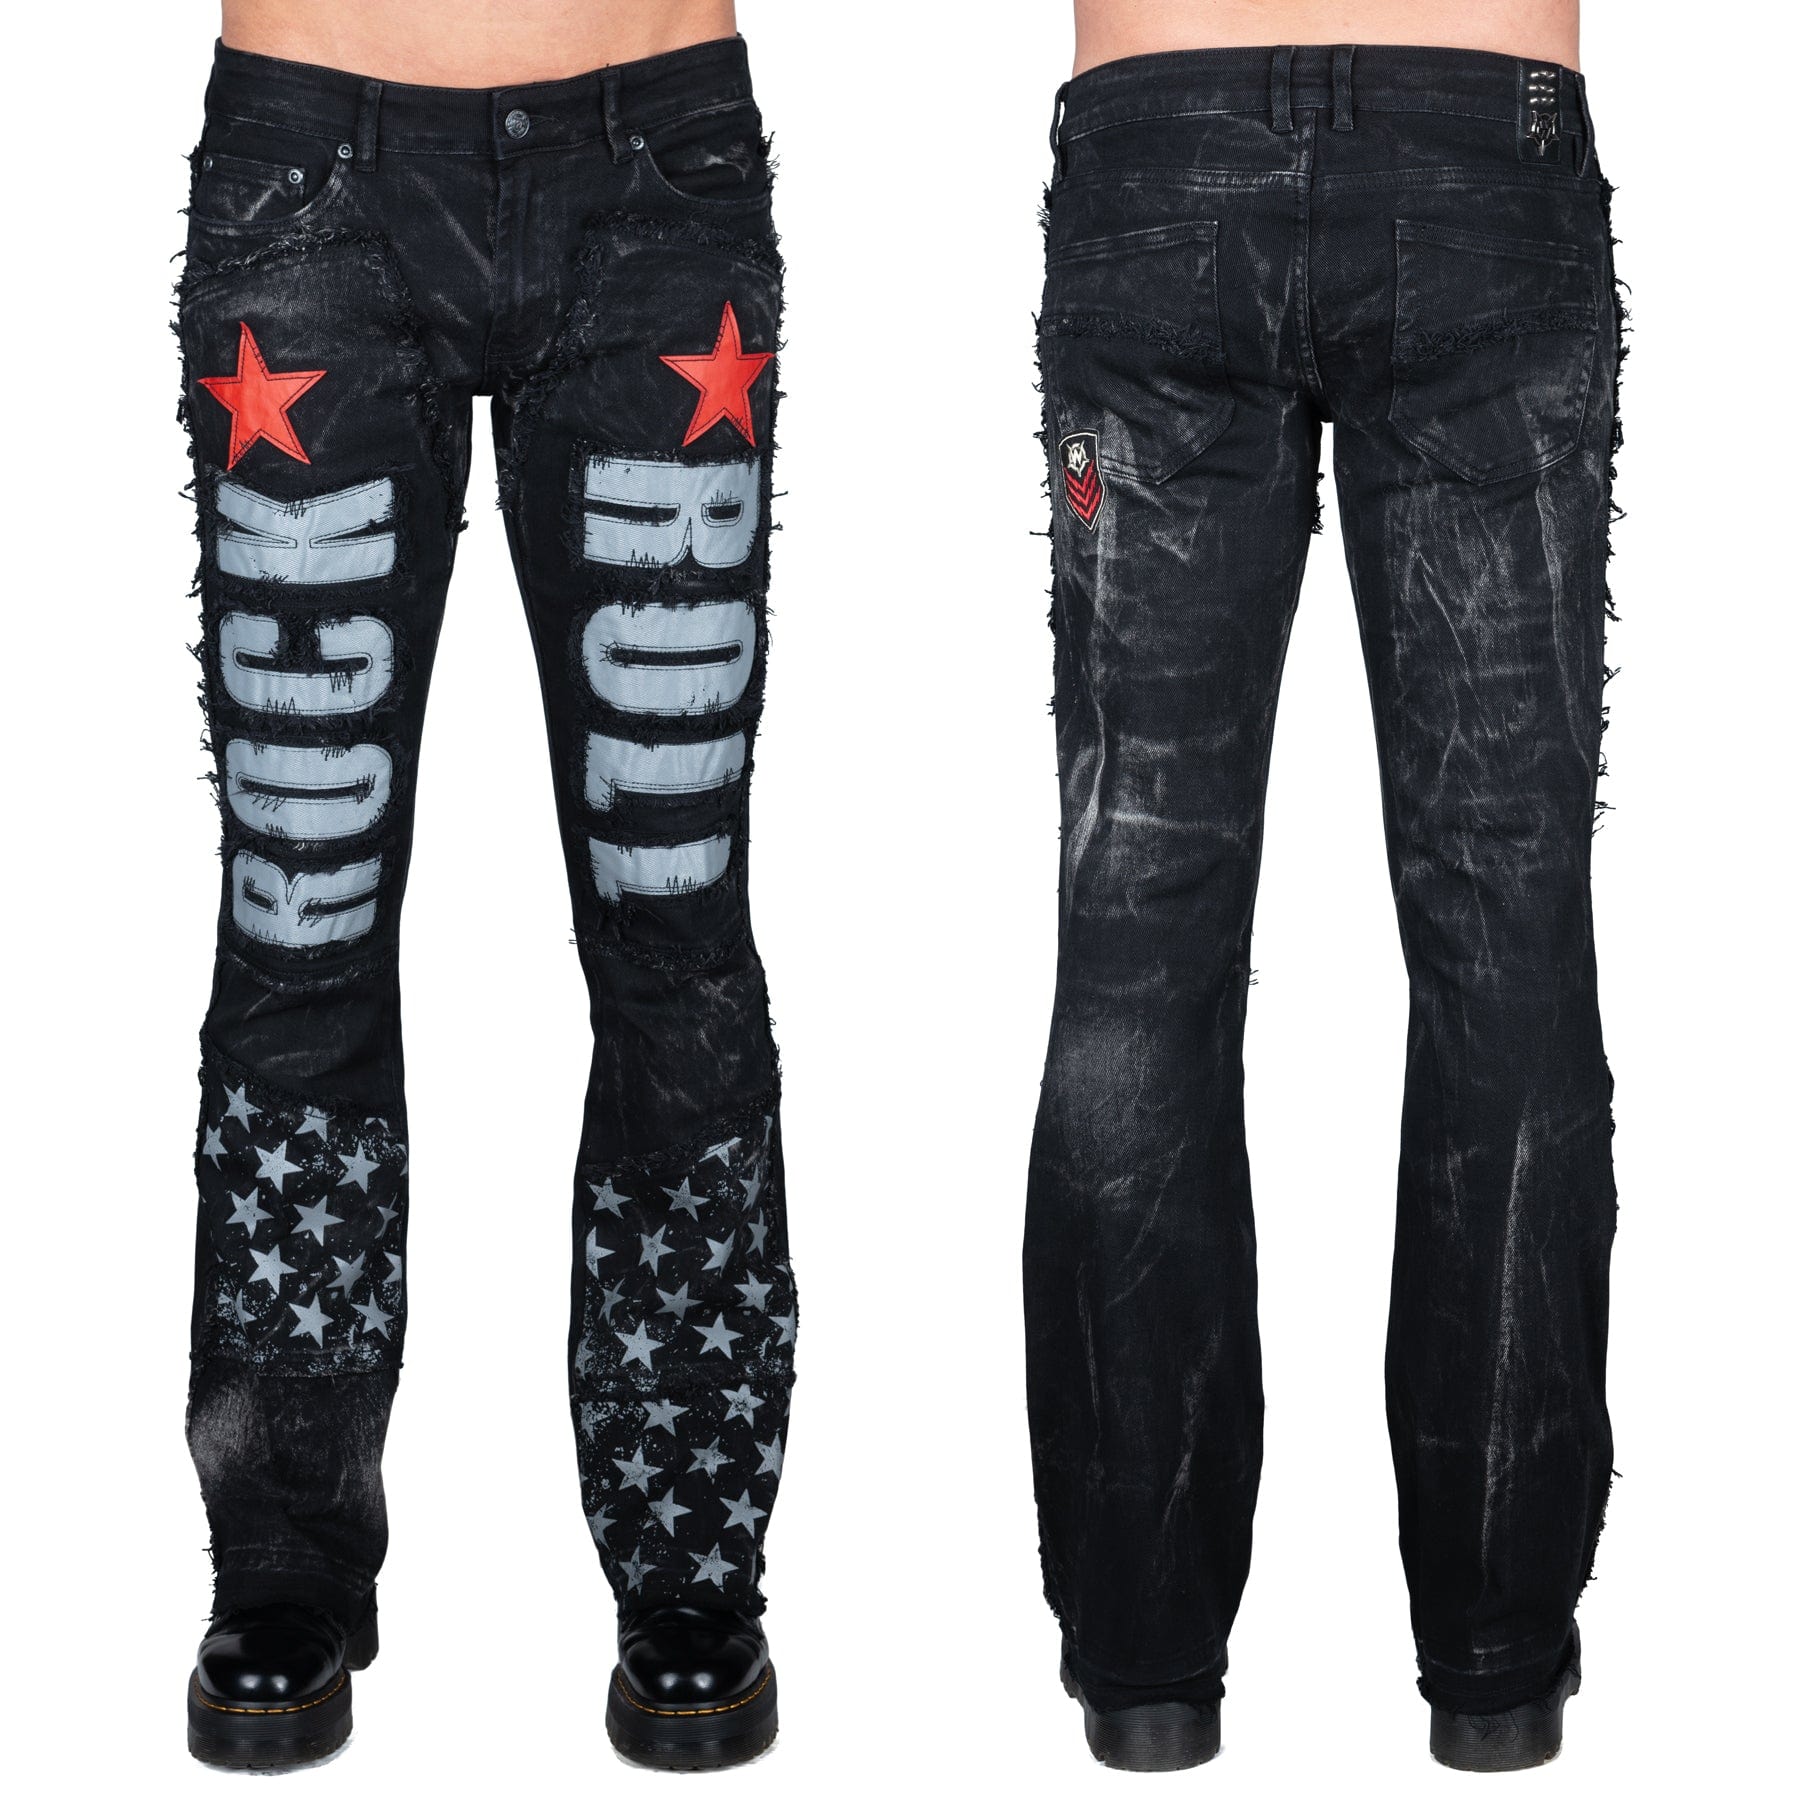 reservation Rang charme Wornstar Clothing Rock N Roll Star Stage Jeans